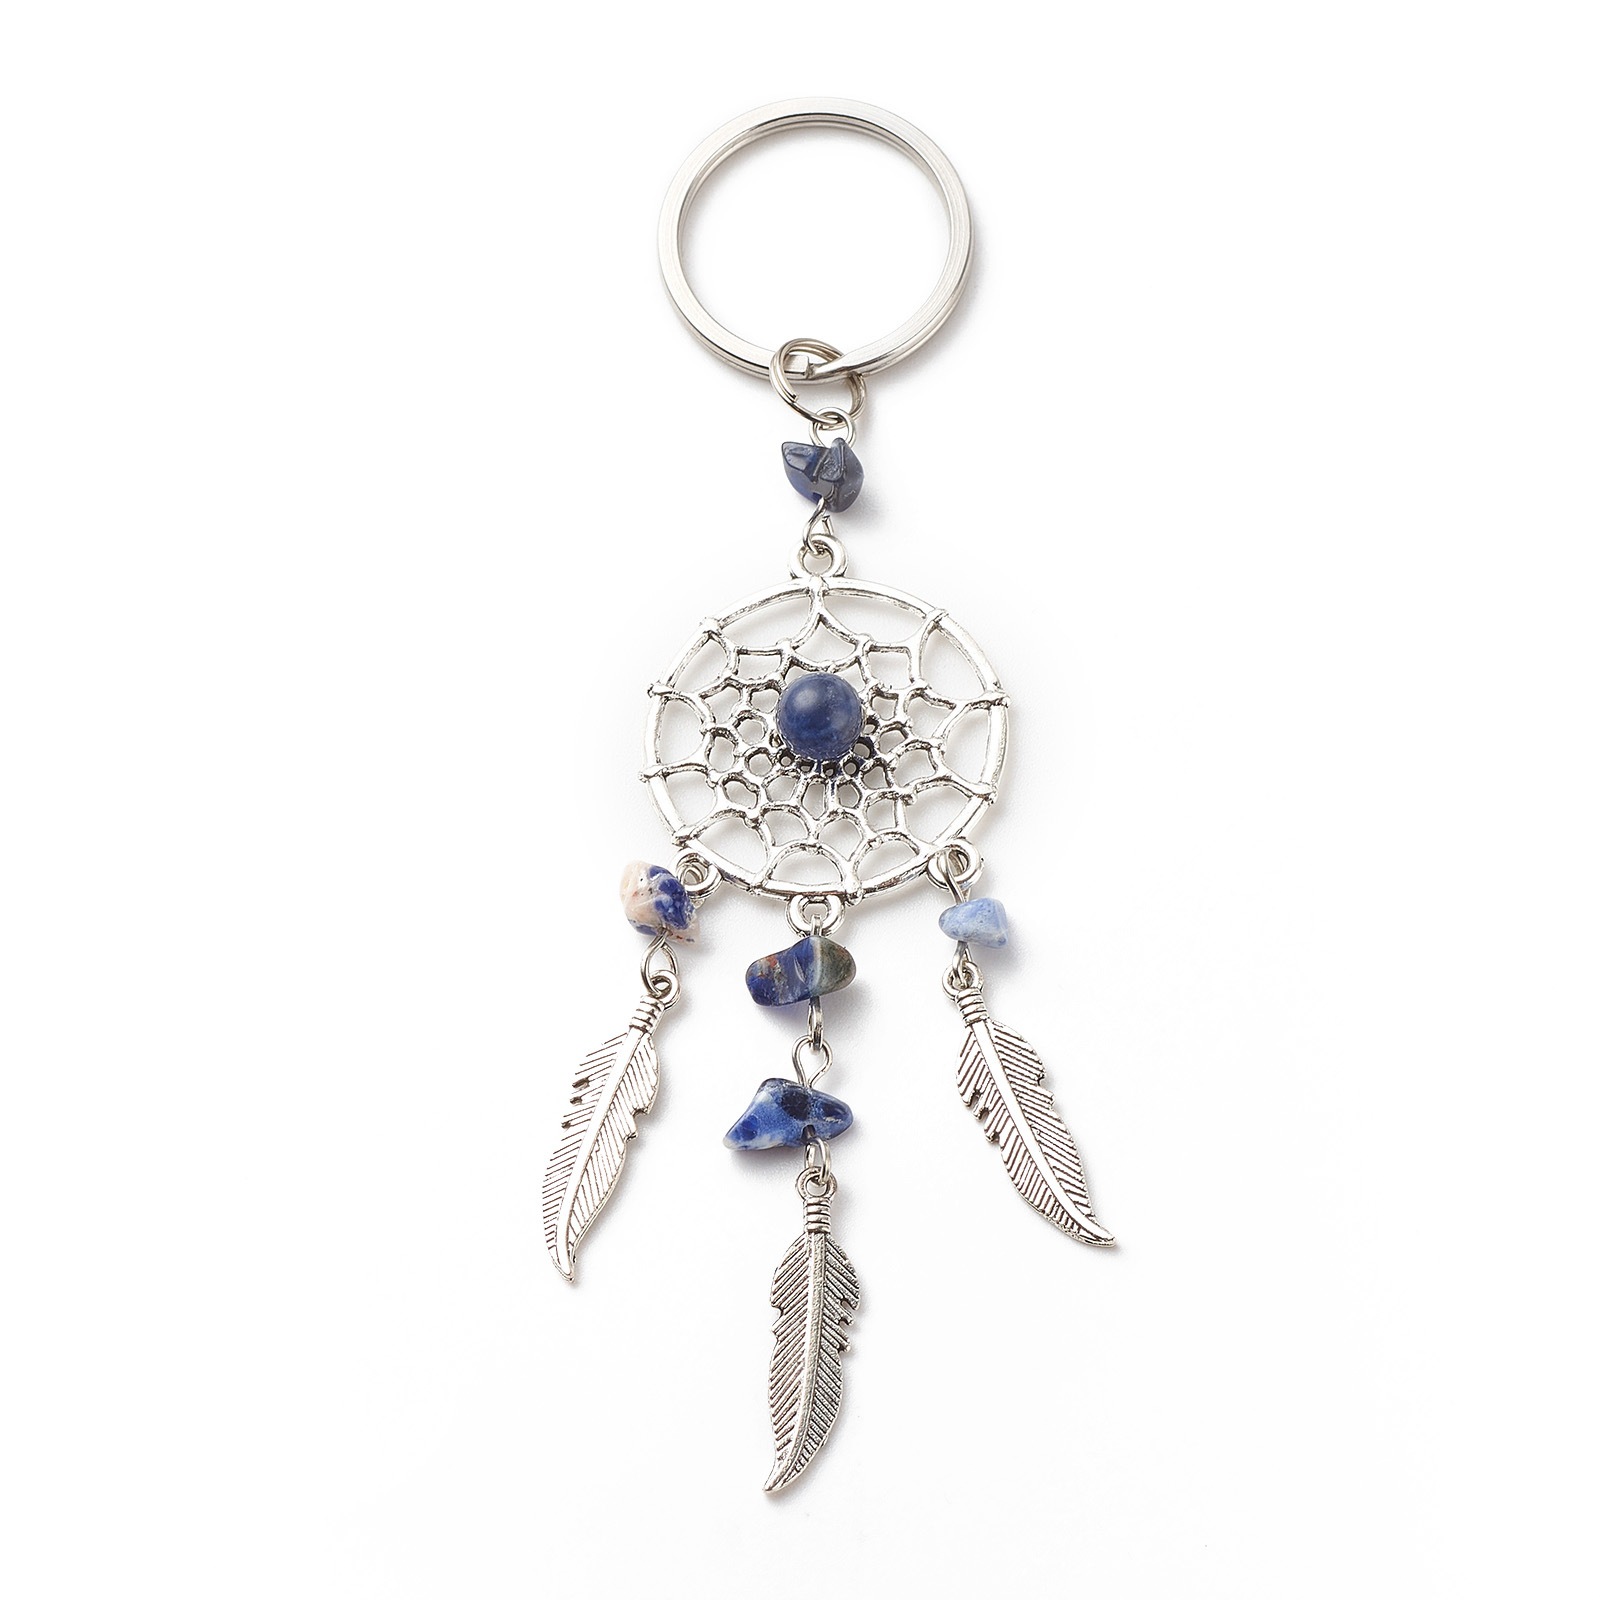 Dream catcher Charms Key Rings Chakra Crystal Gravel Chip Stone Beads Key Chain Agate Jade Bag ACC